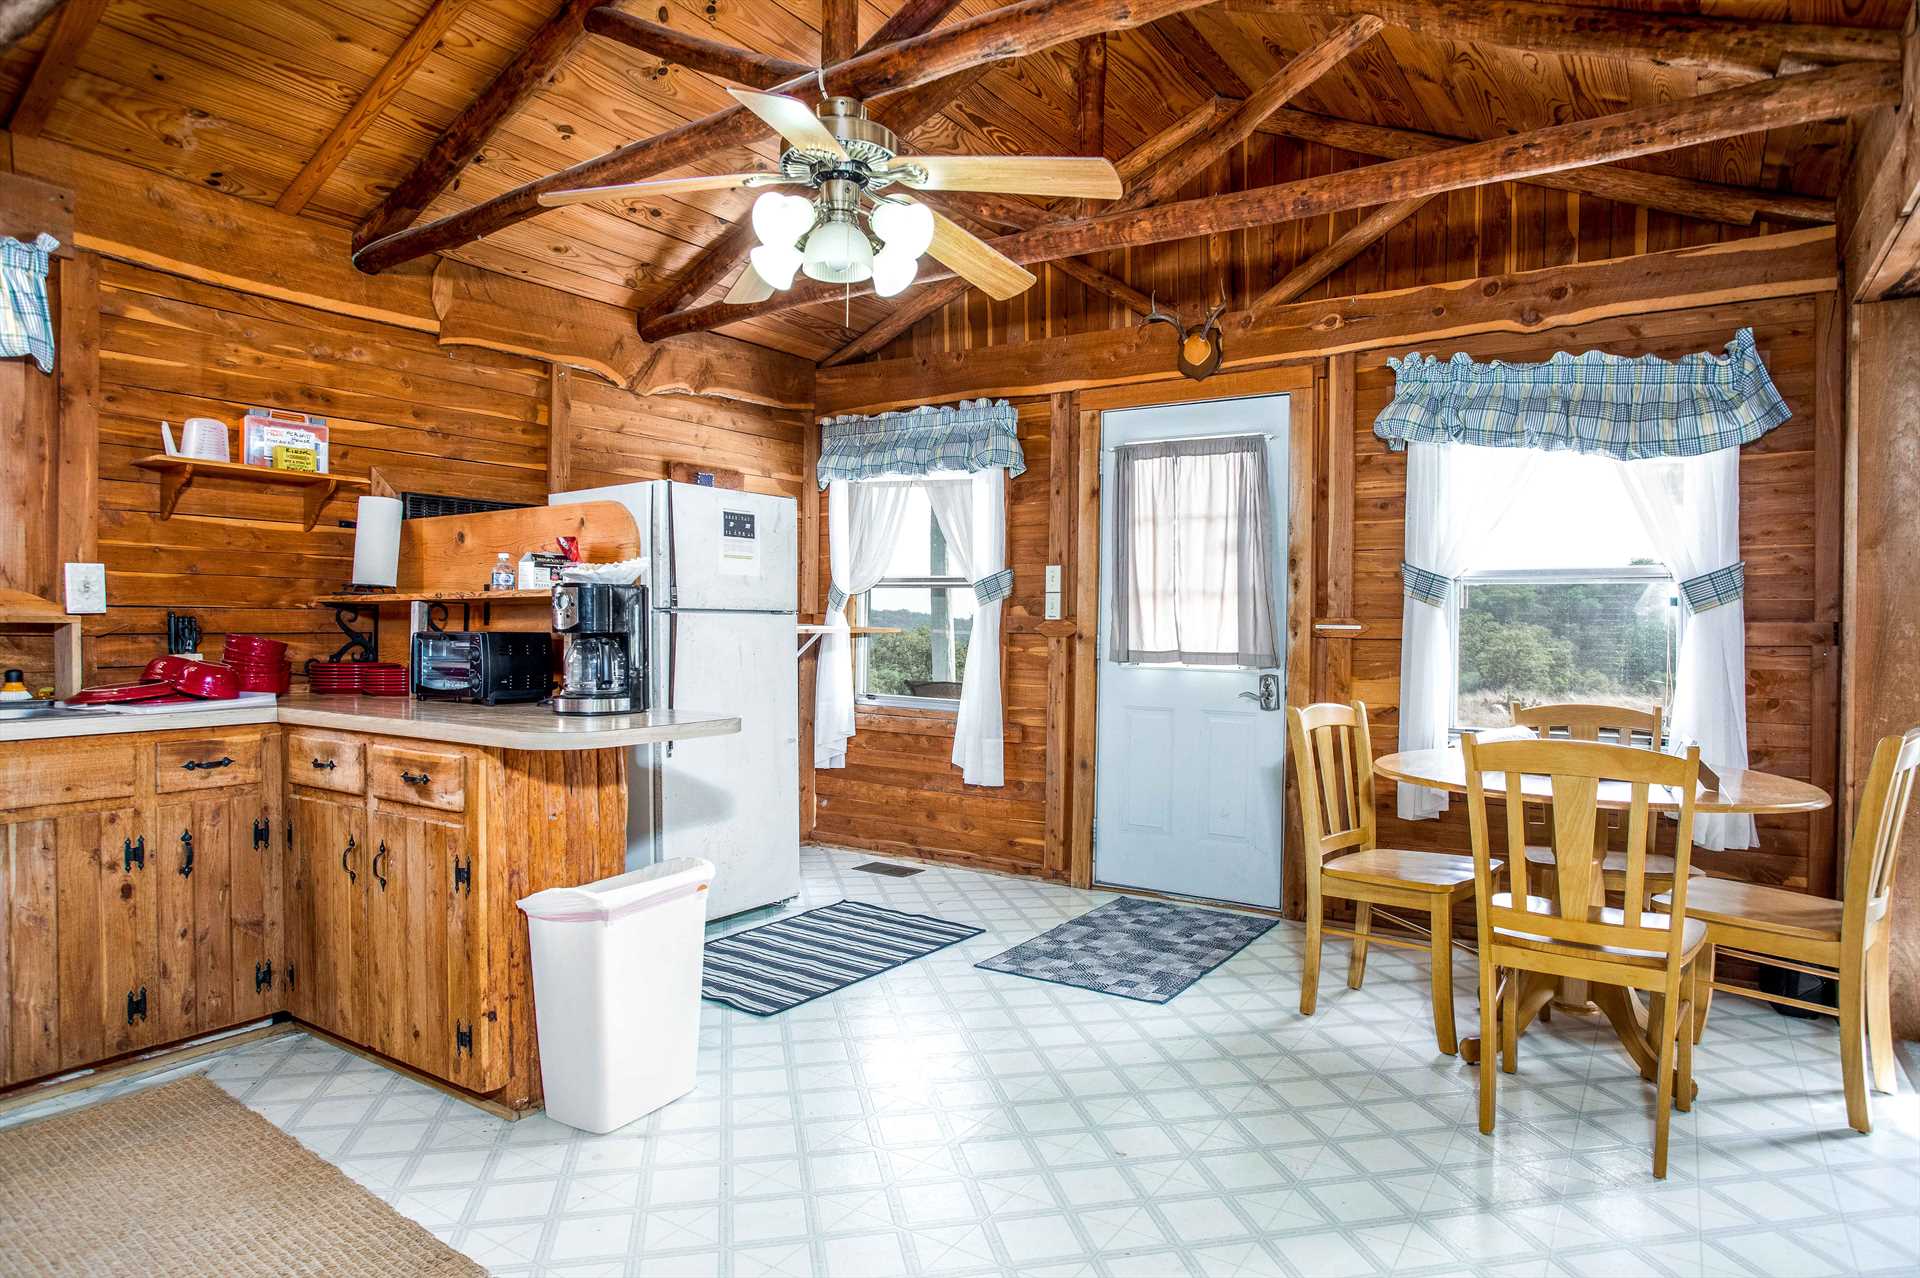                                                 With wood furnishings, gleaming tile, and plenty of natural light, you almost expect Grandma to step out of the country kitchen with a warm plate of cookies!